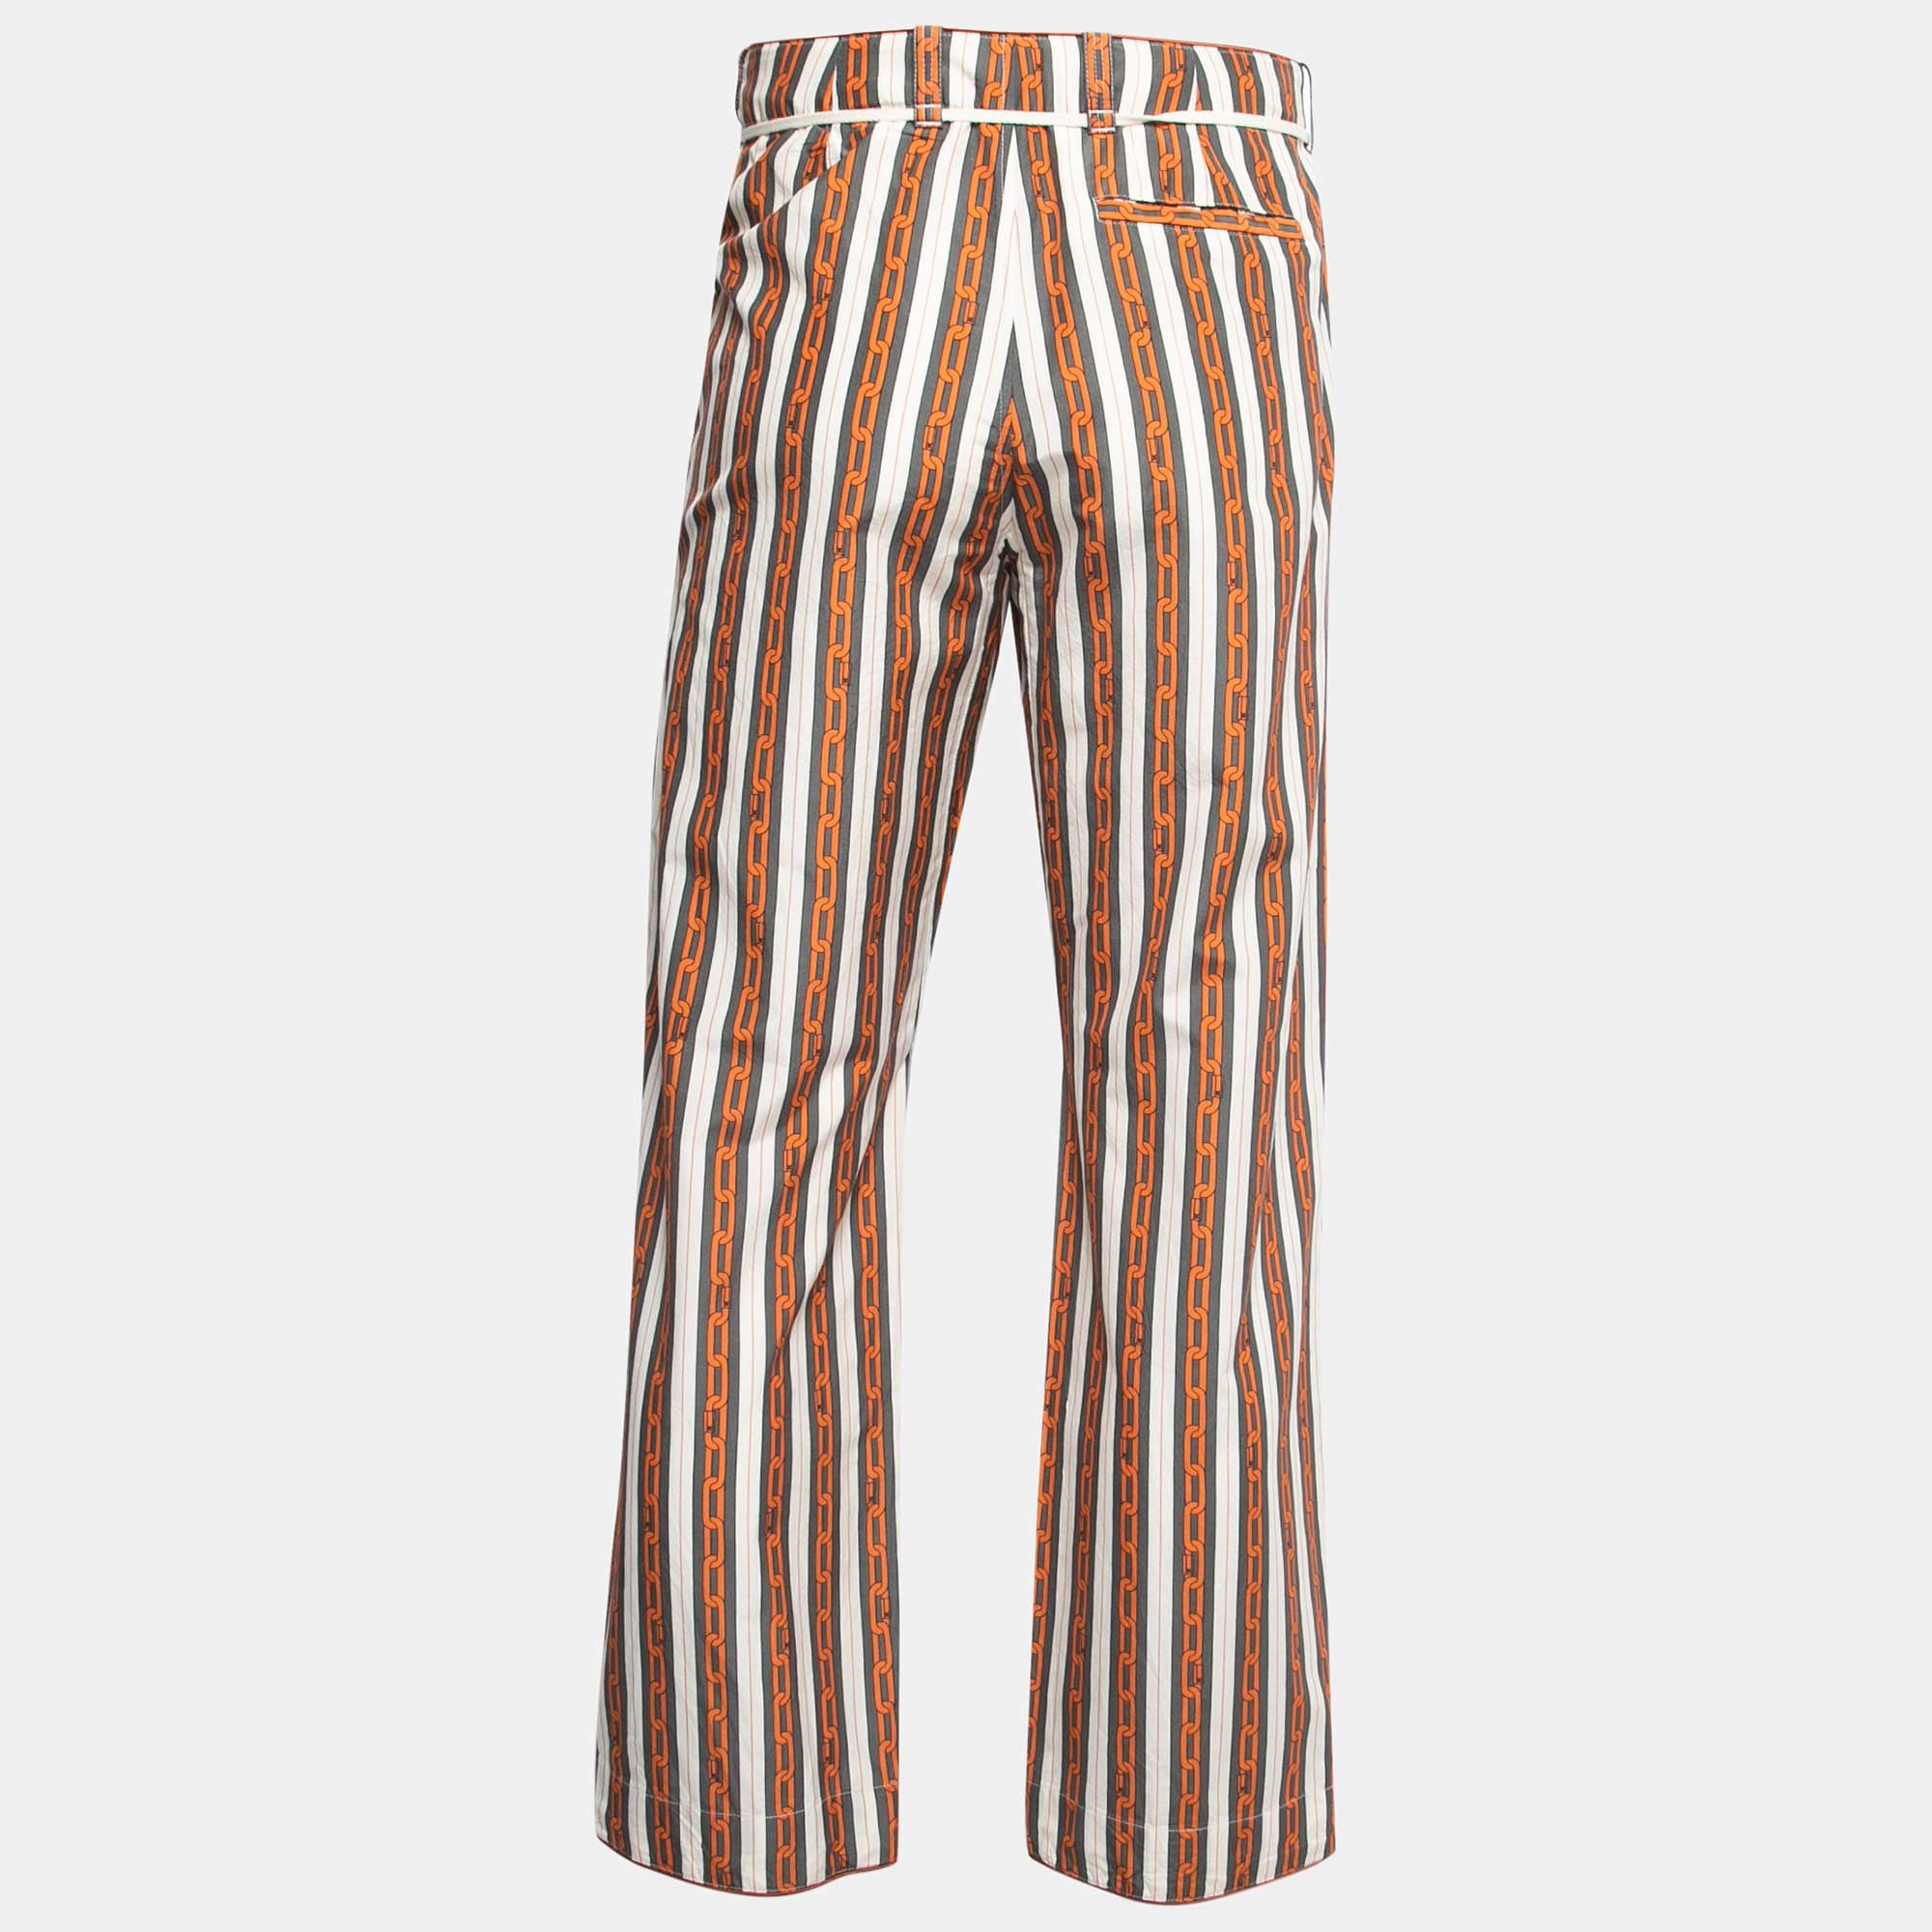 Louis Vuitton's smart and refined designs make the label a great choice when looking for stylish clothing. These striped trousers in cotton have a finely-tailored silhouette to give you a neat look and a comfortable fit.

